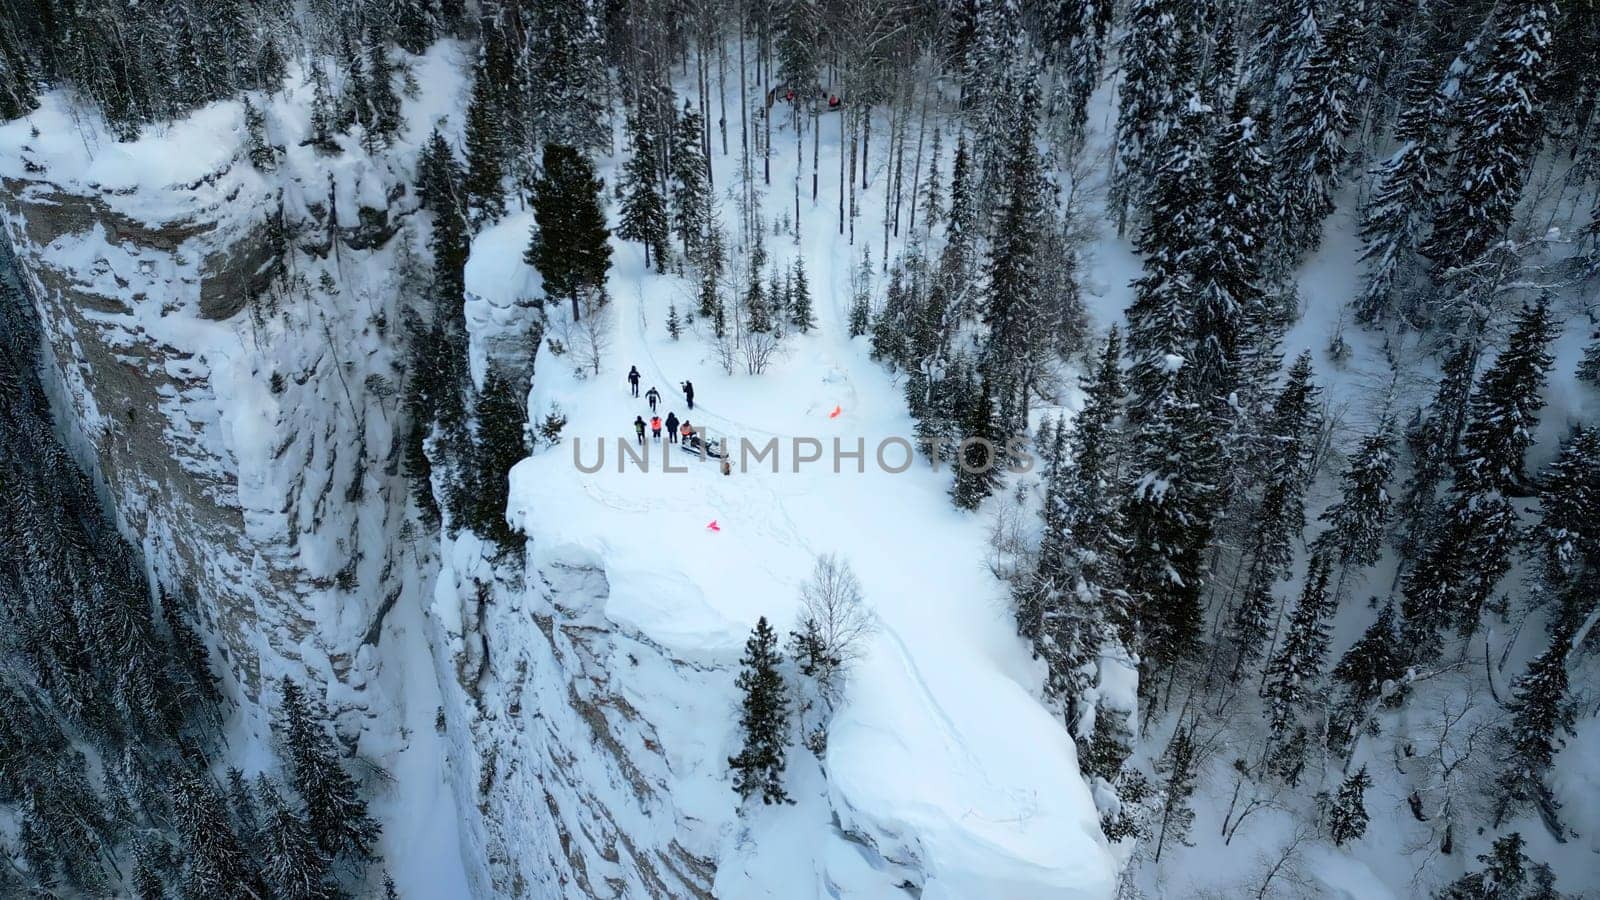 Winter mountain cliff covered by snow, ice, and fur trees. Clip. Stunning frozen winter nature, aerial view of tourists enjoying the day on the cliff edge